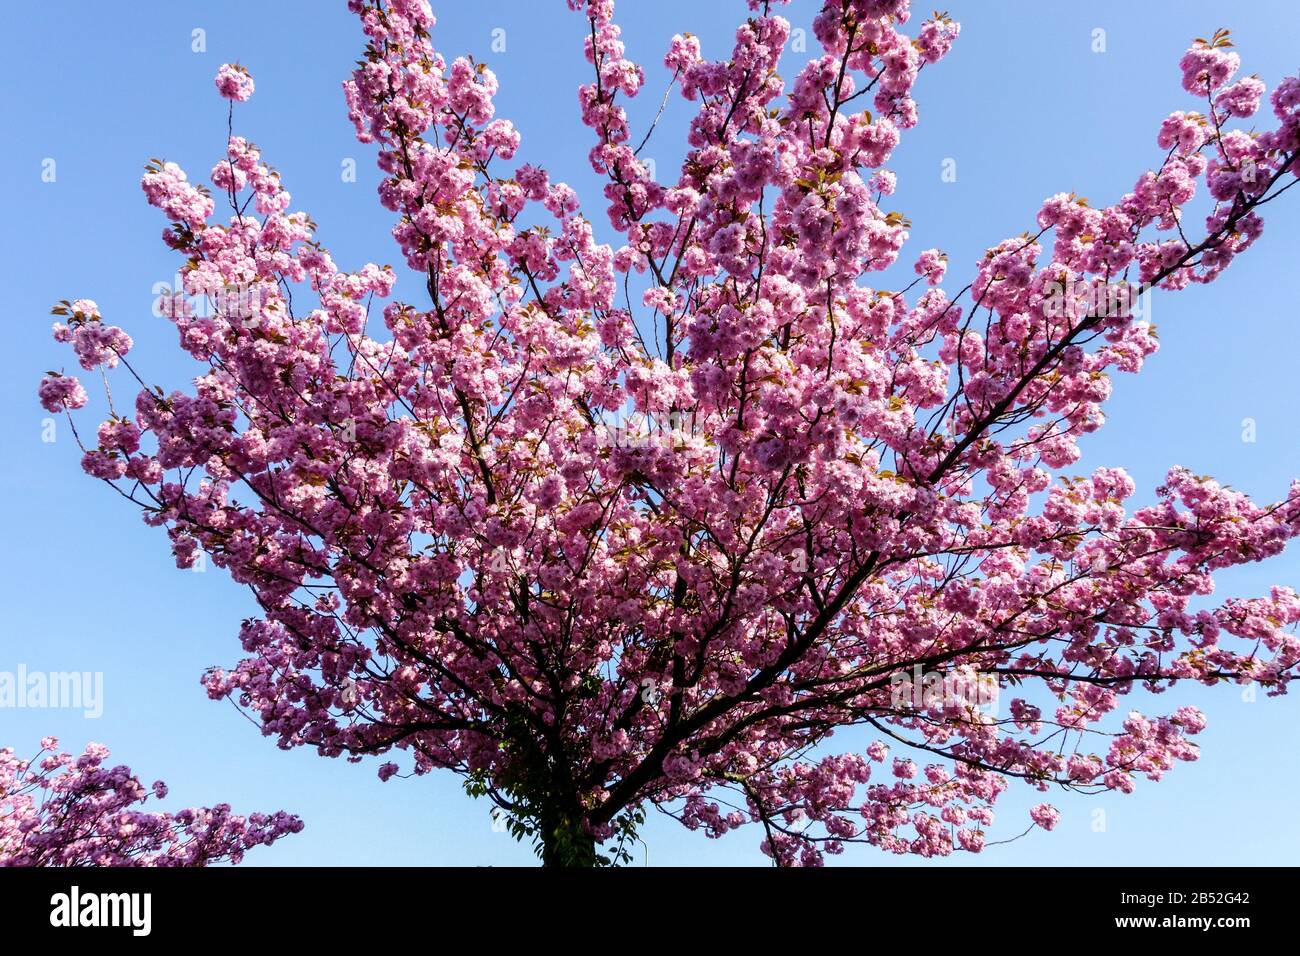 Spring tree in bloom pink Cherry tree blossoms against blue sky Flowering tree Stock Photo